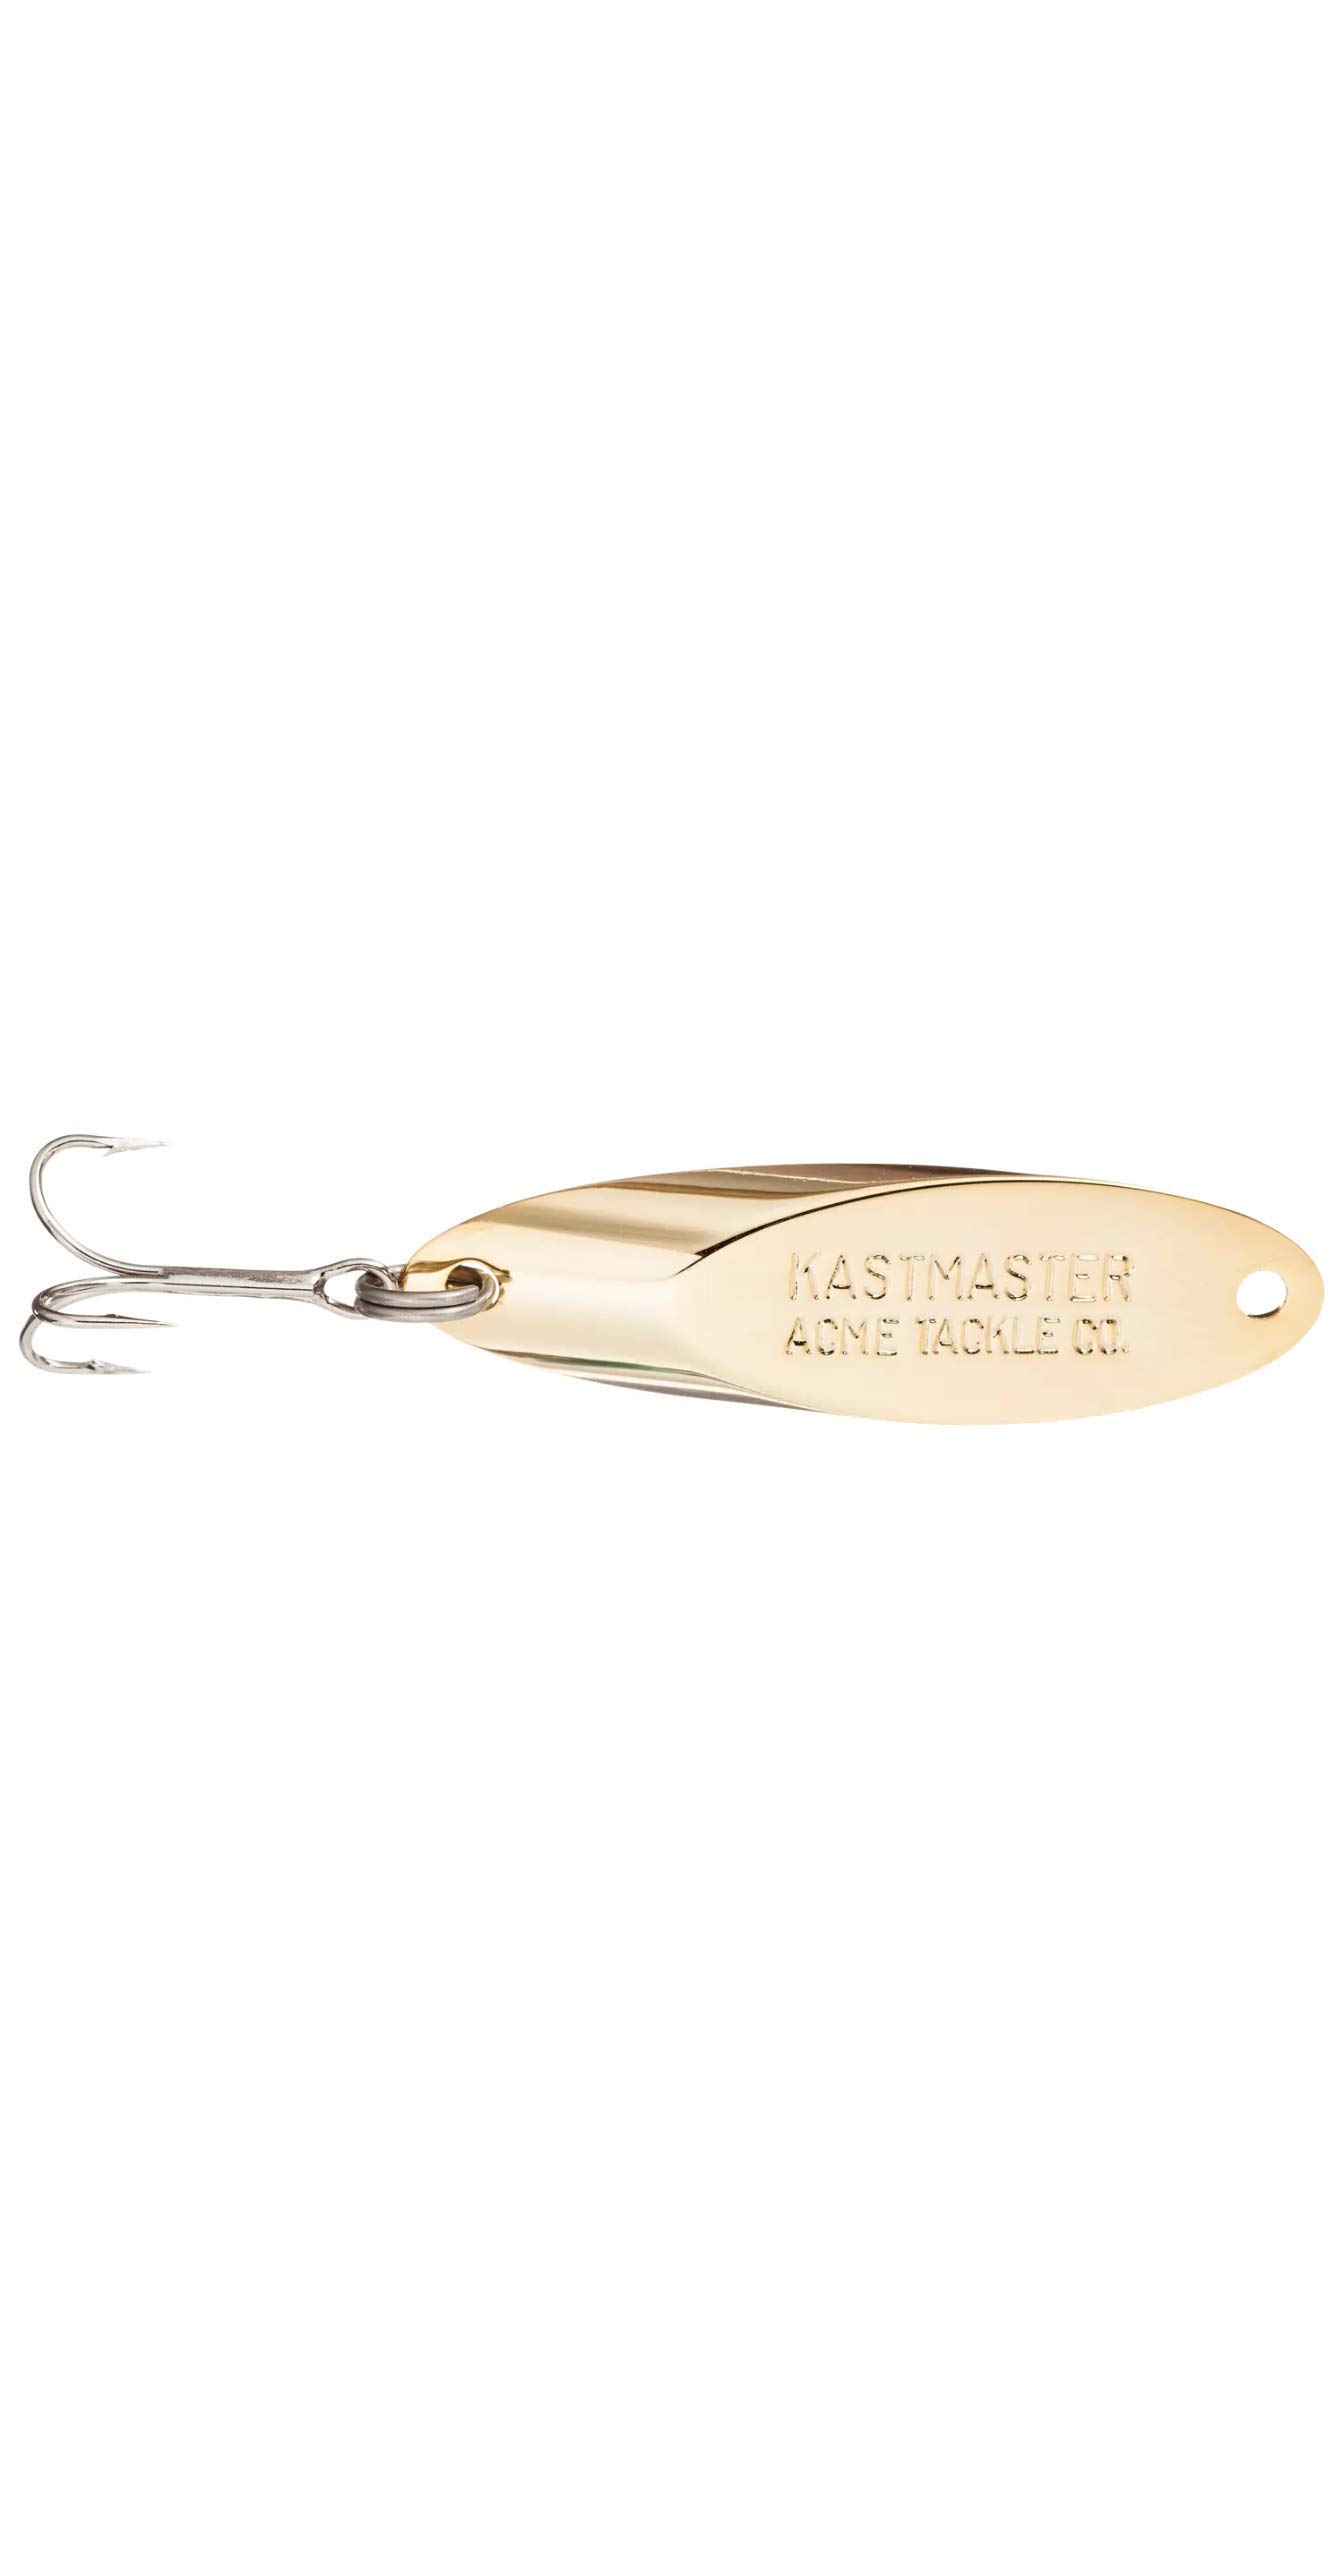 Acme Kastmaster Fishing Lure - Balanced and Aerodynamic for Huge Distance  Casts and Wild Action Without Line Twist 1/4 oz. Gold